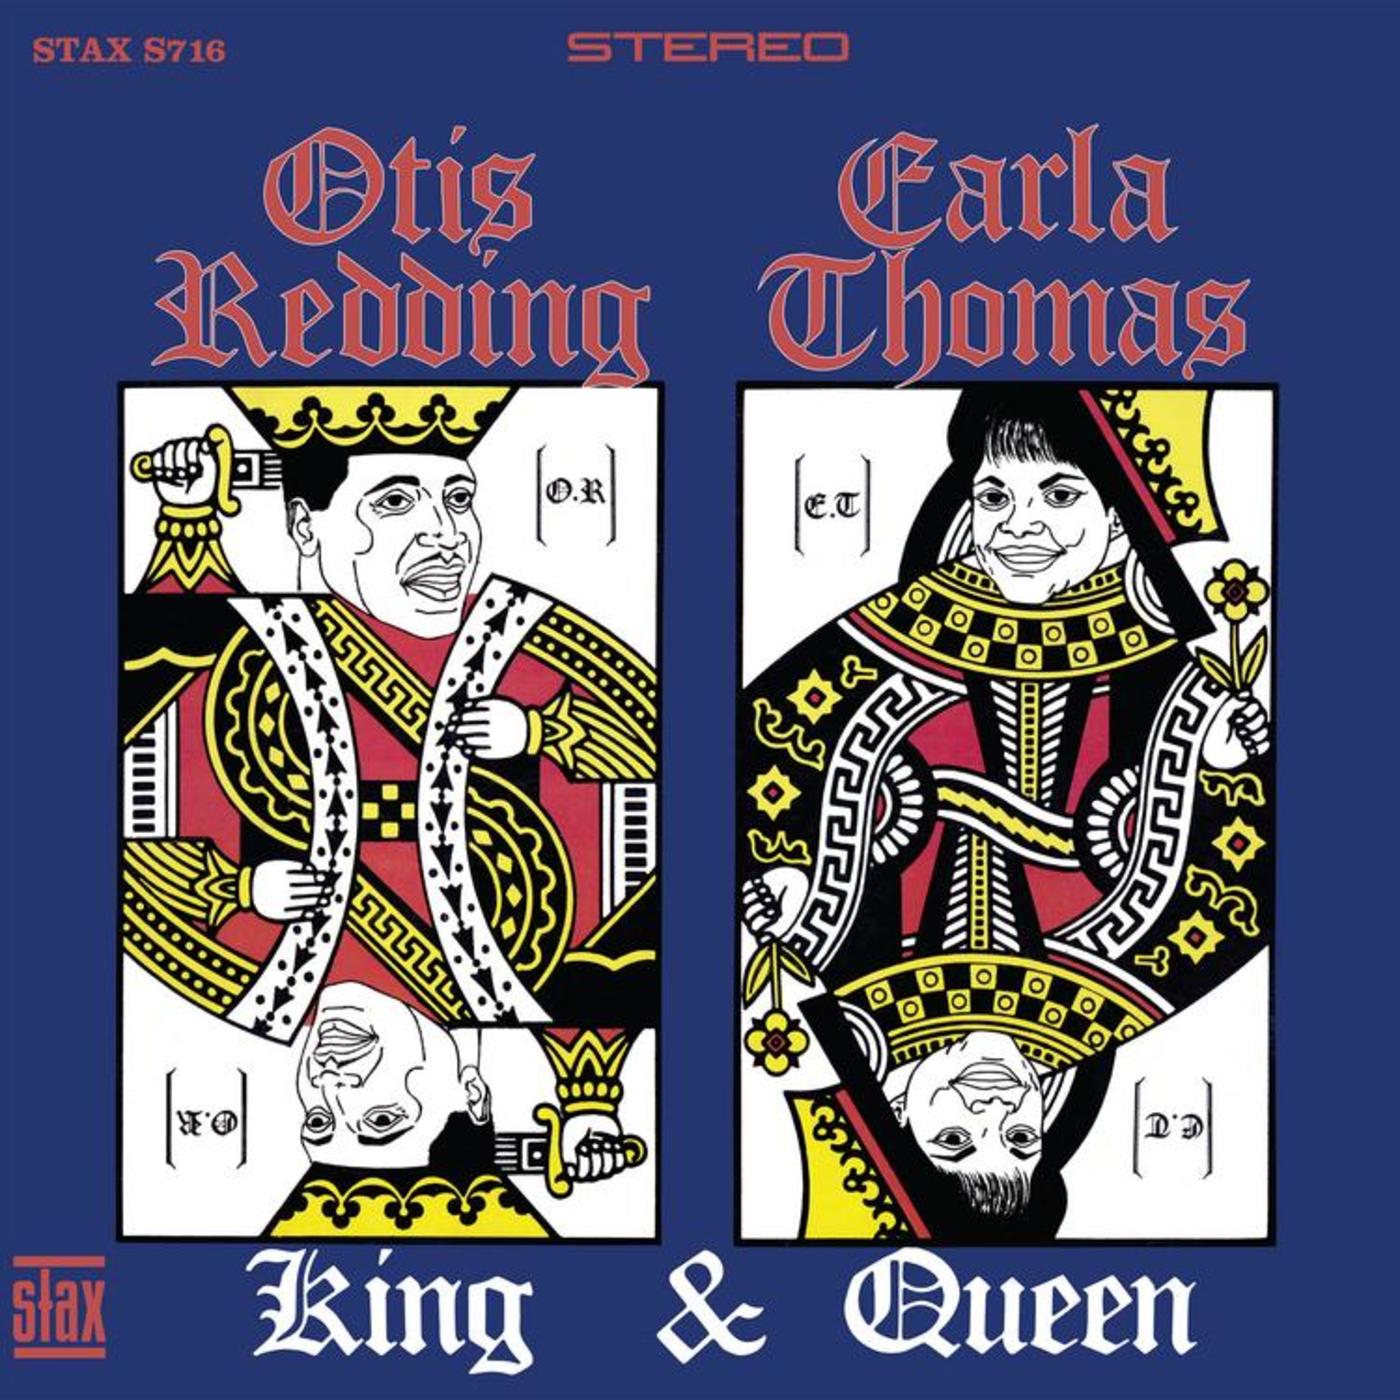 King & Queen (50th Anniversary Edition)